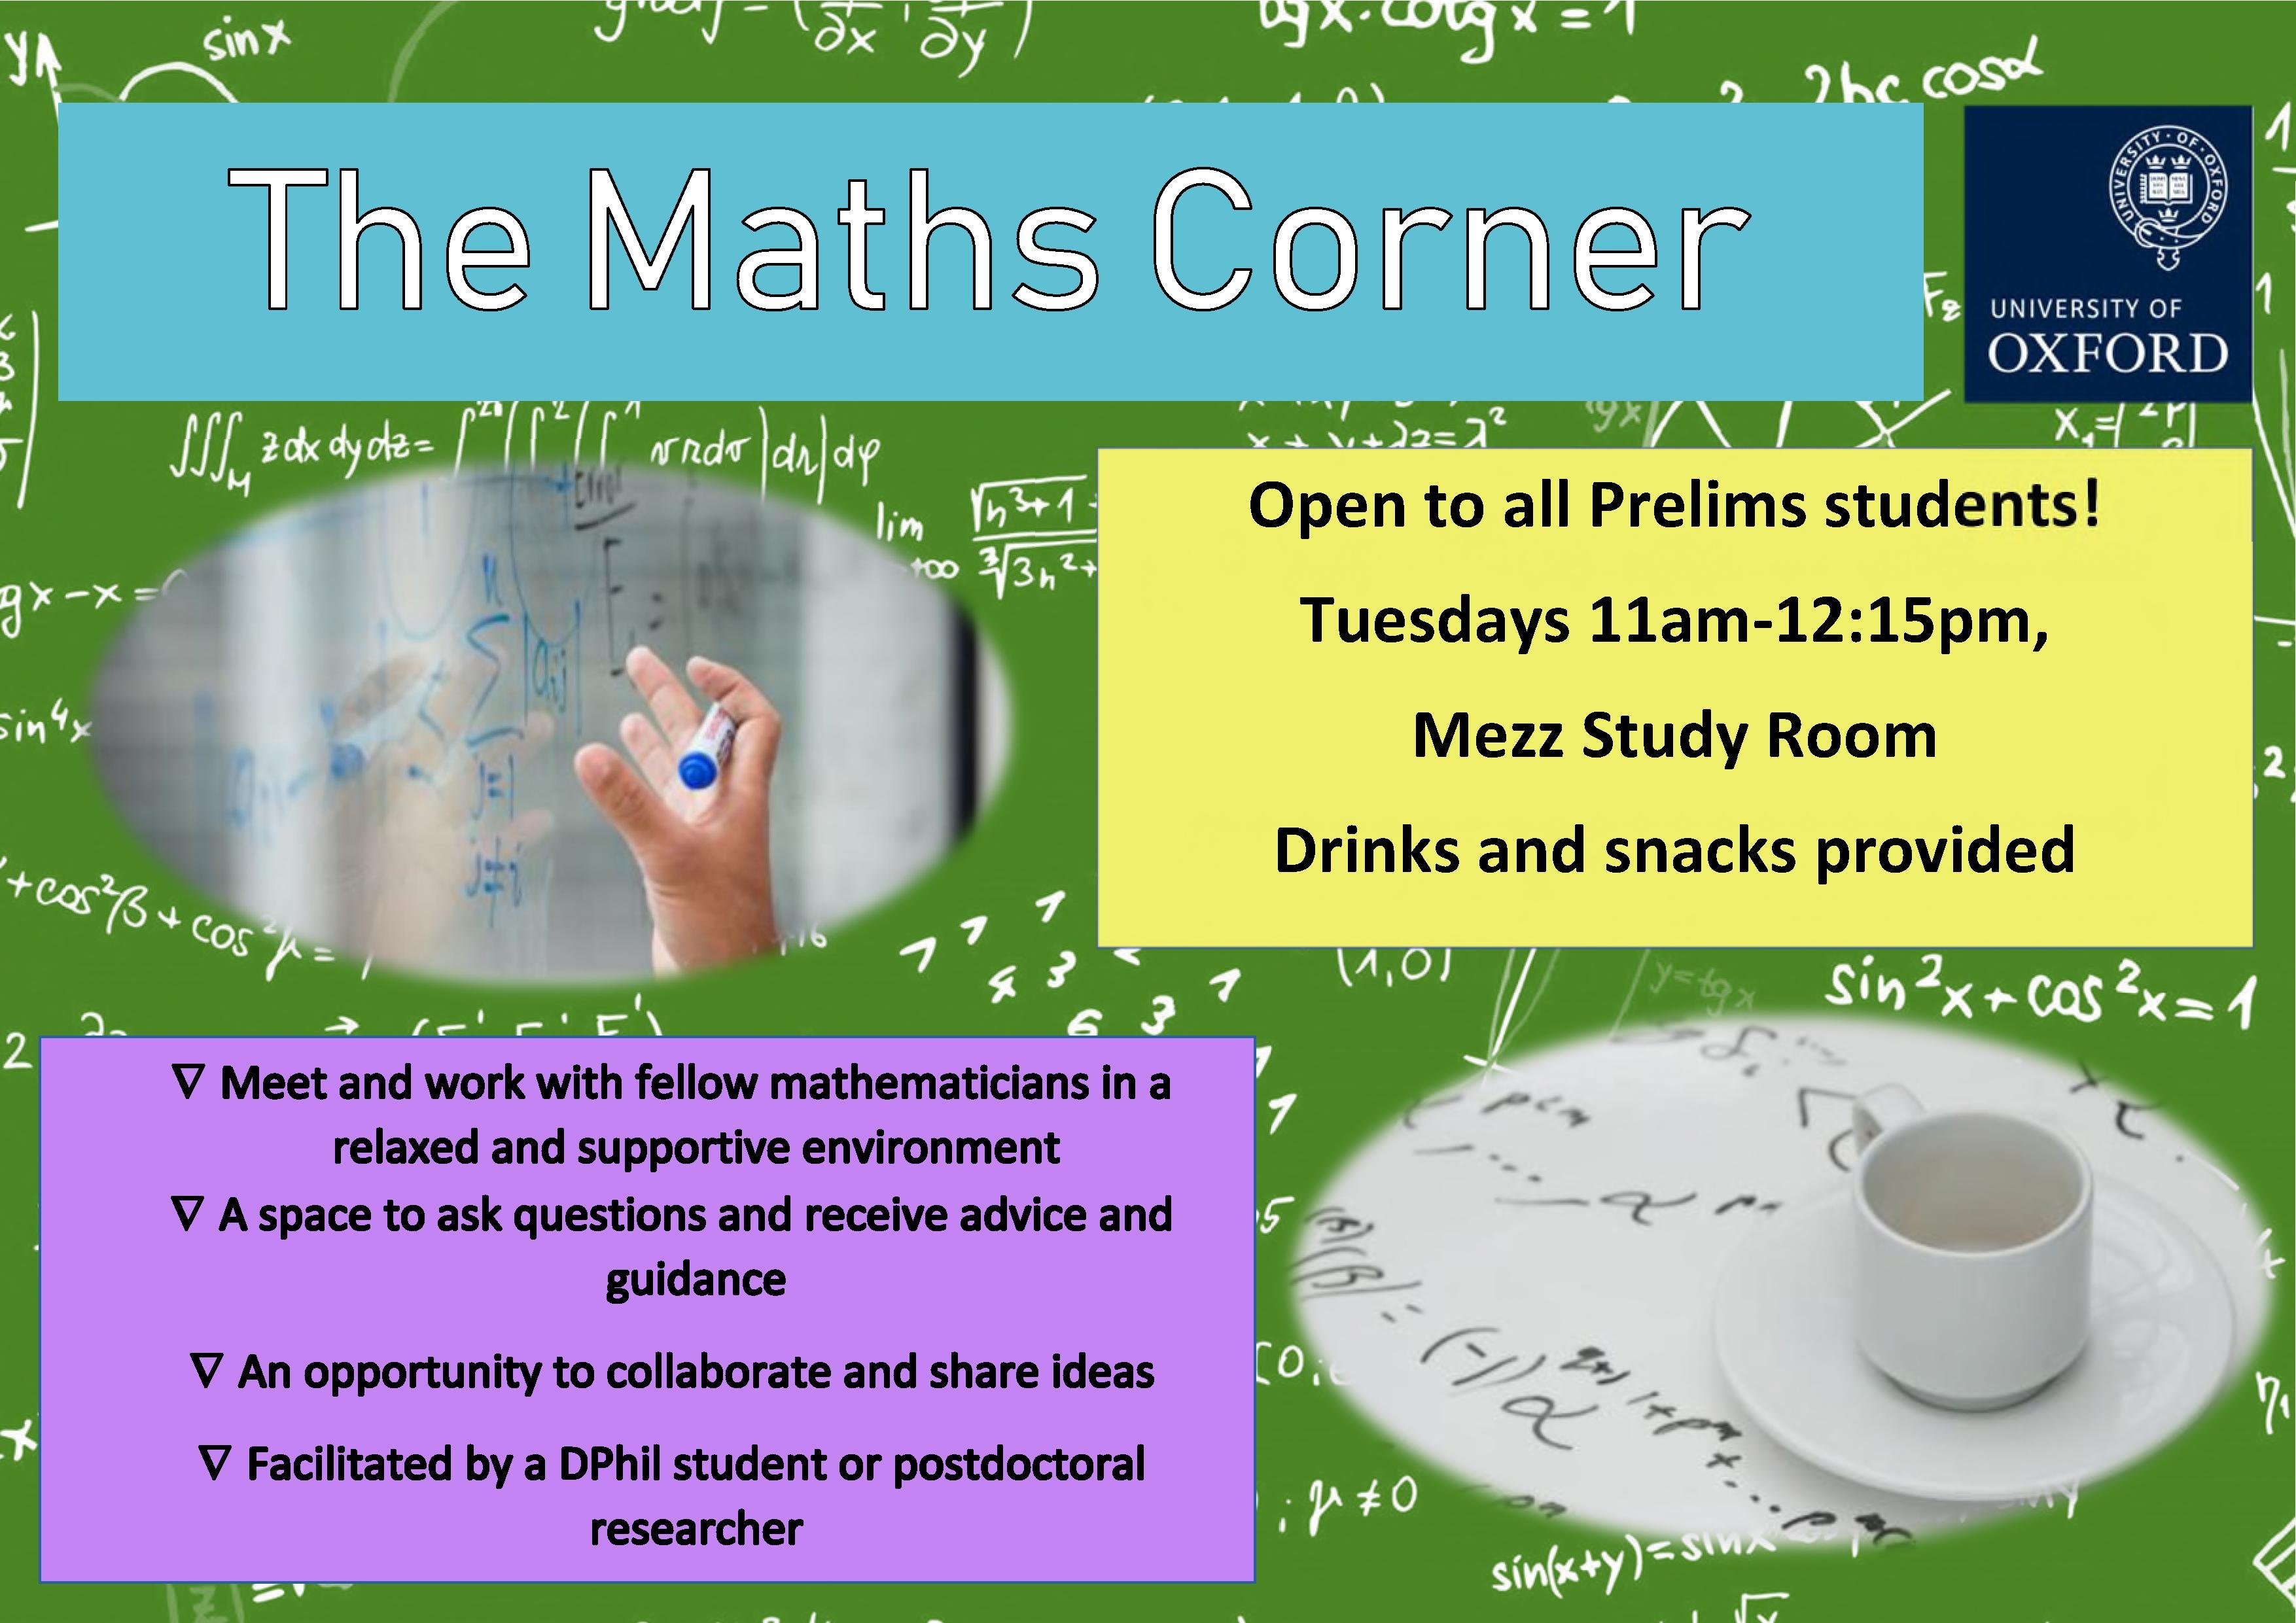 The Maths Corner promotional poster